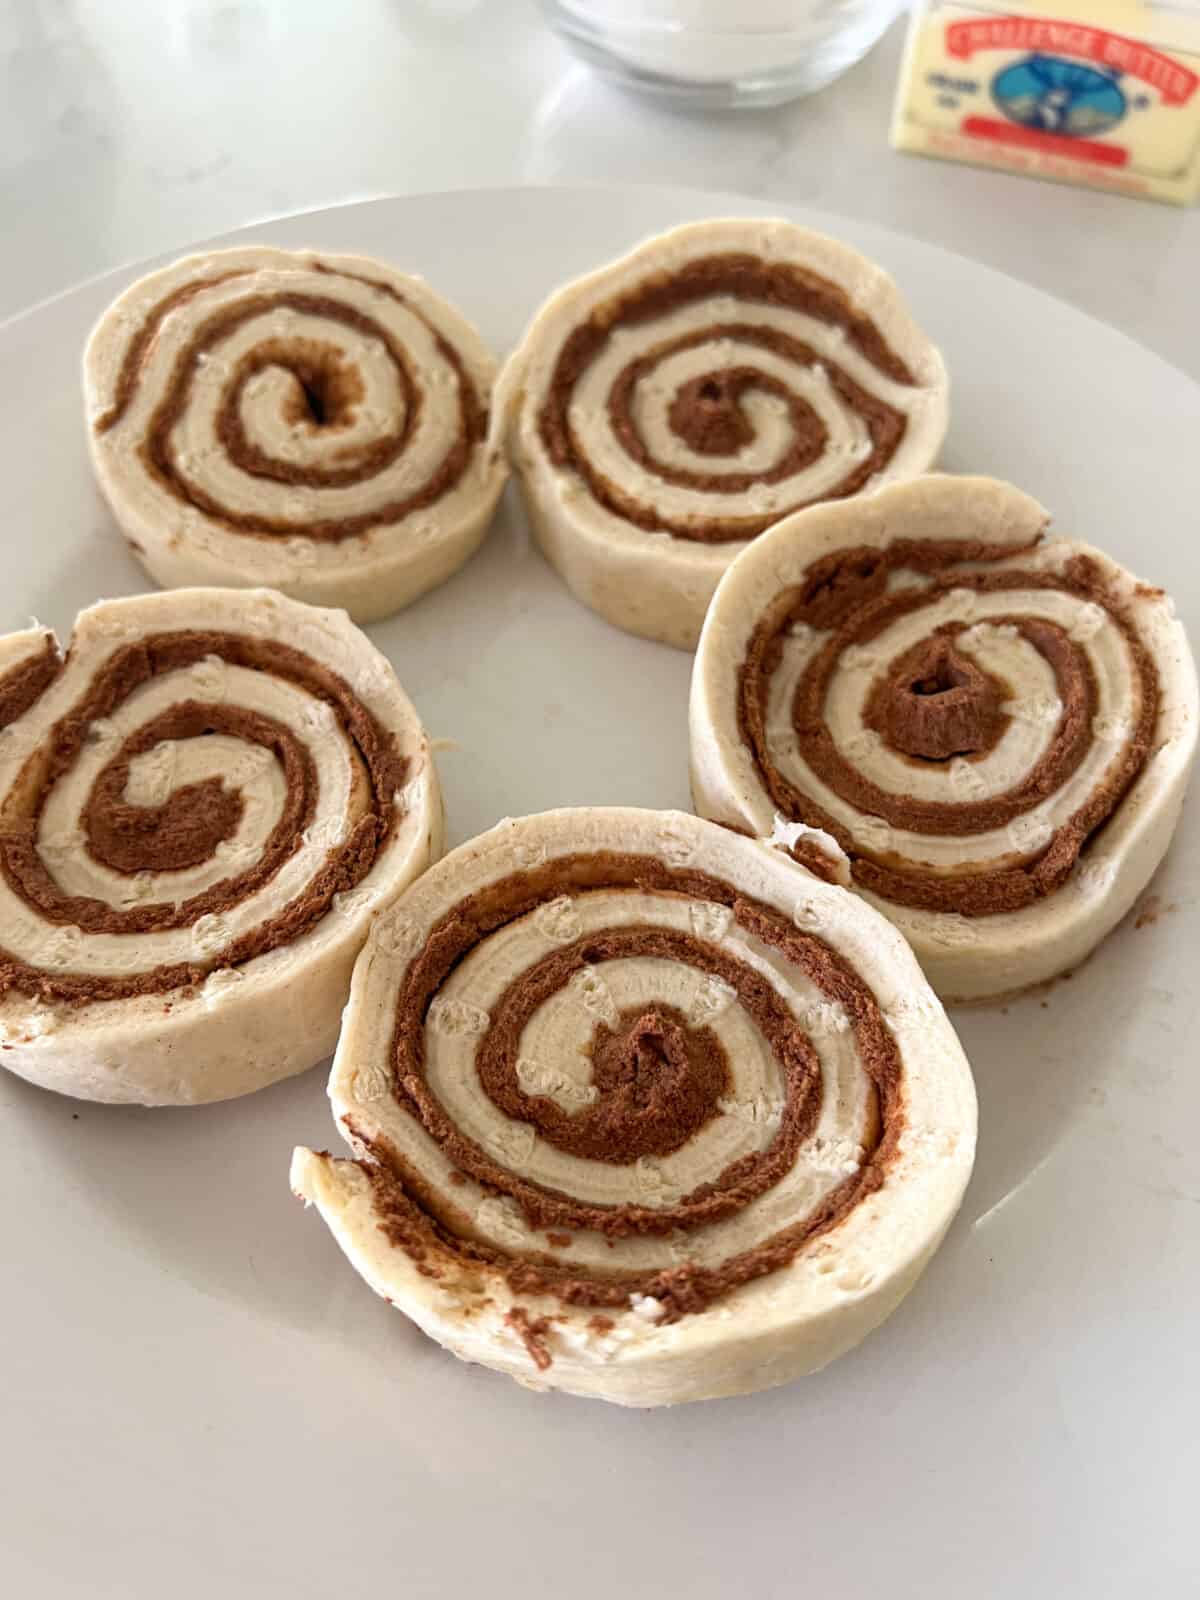 refrigerated cinnamon roll dough on plate